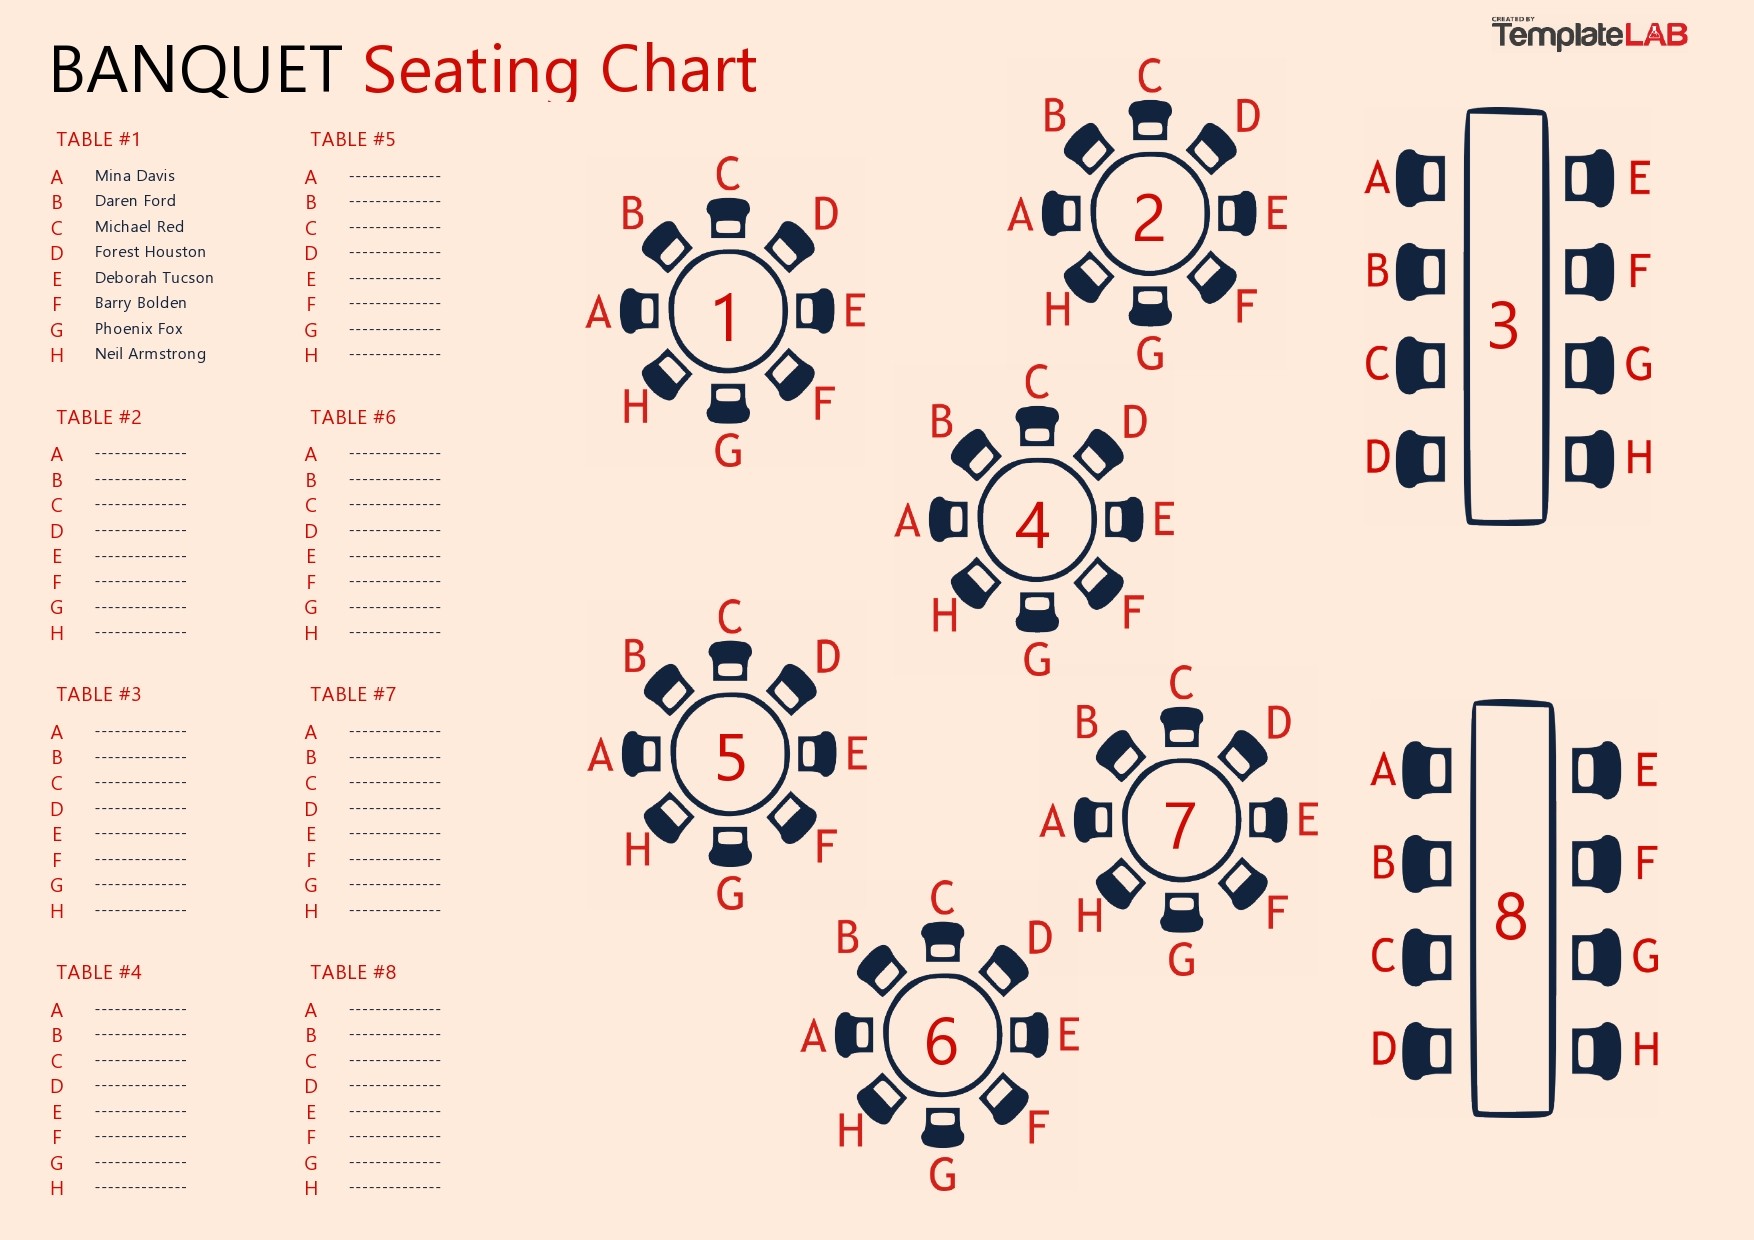 40  Great Seating Chart Templates (Wedding Classroom   more)